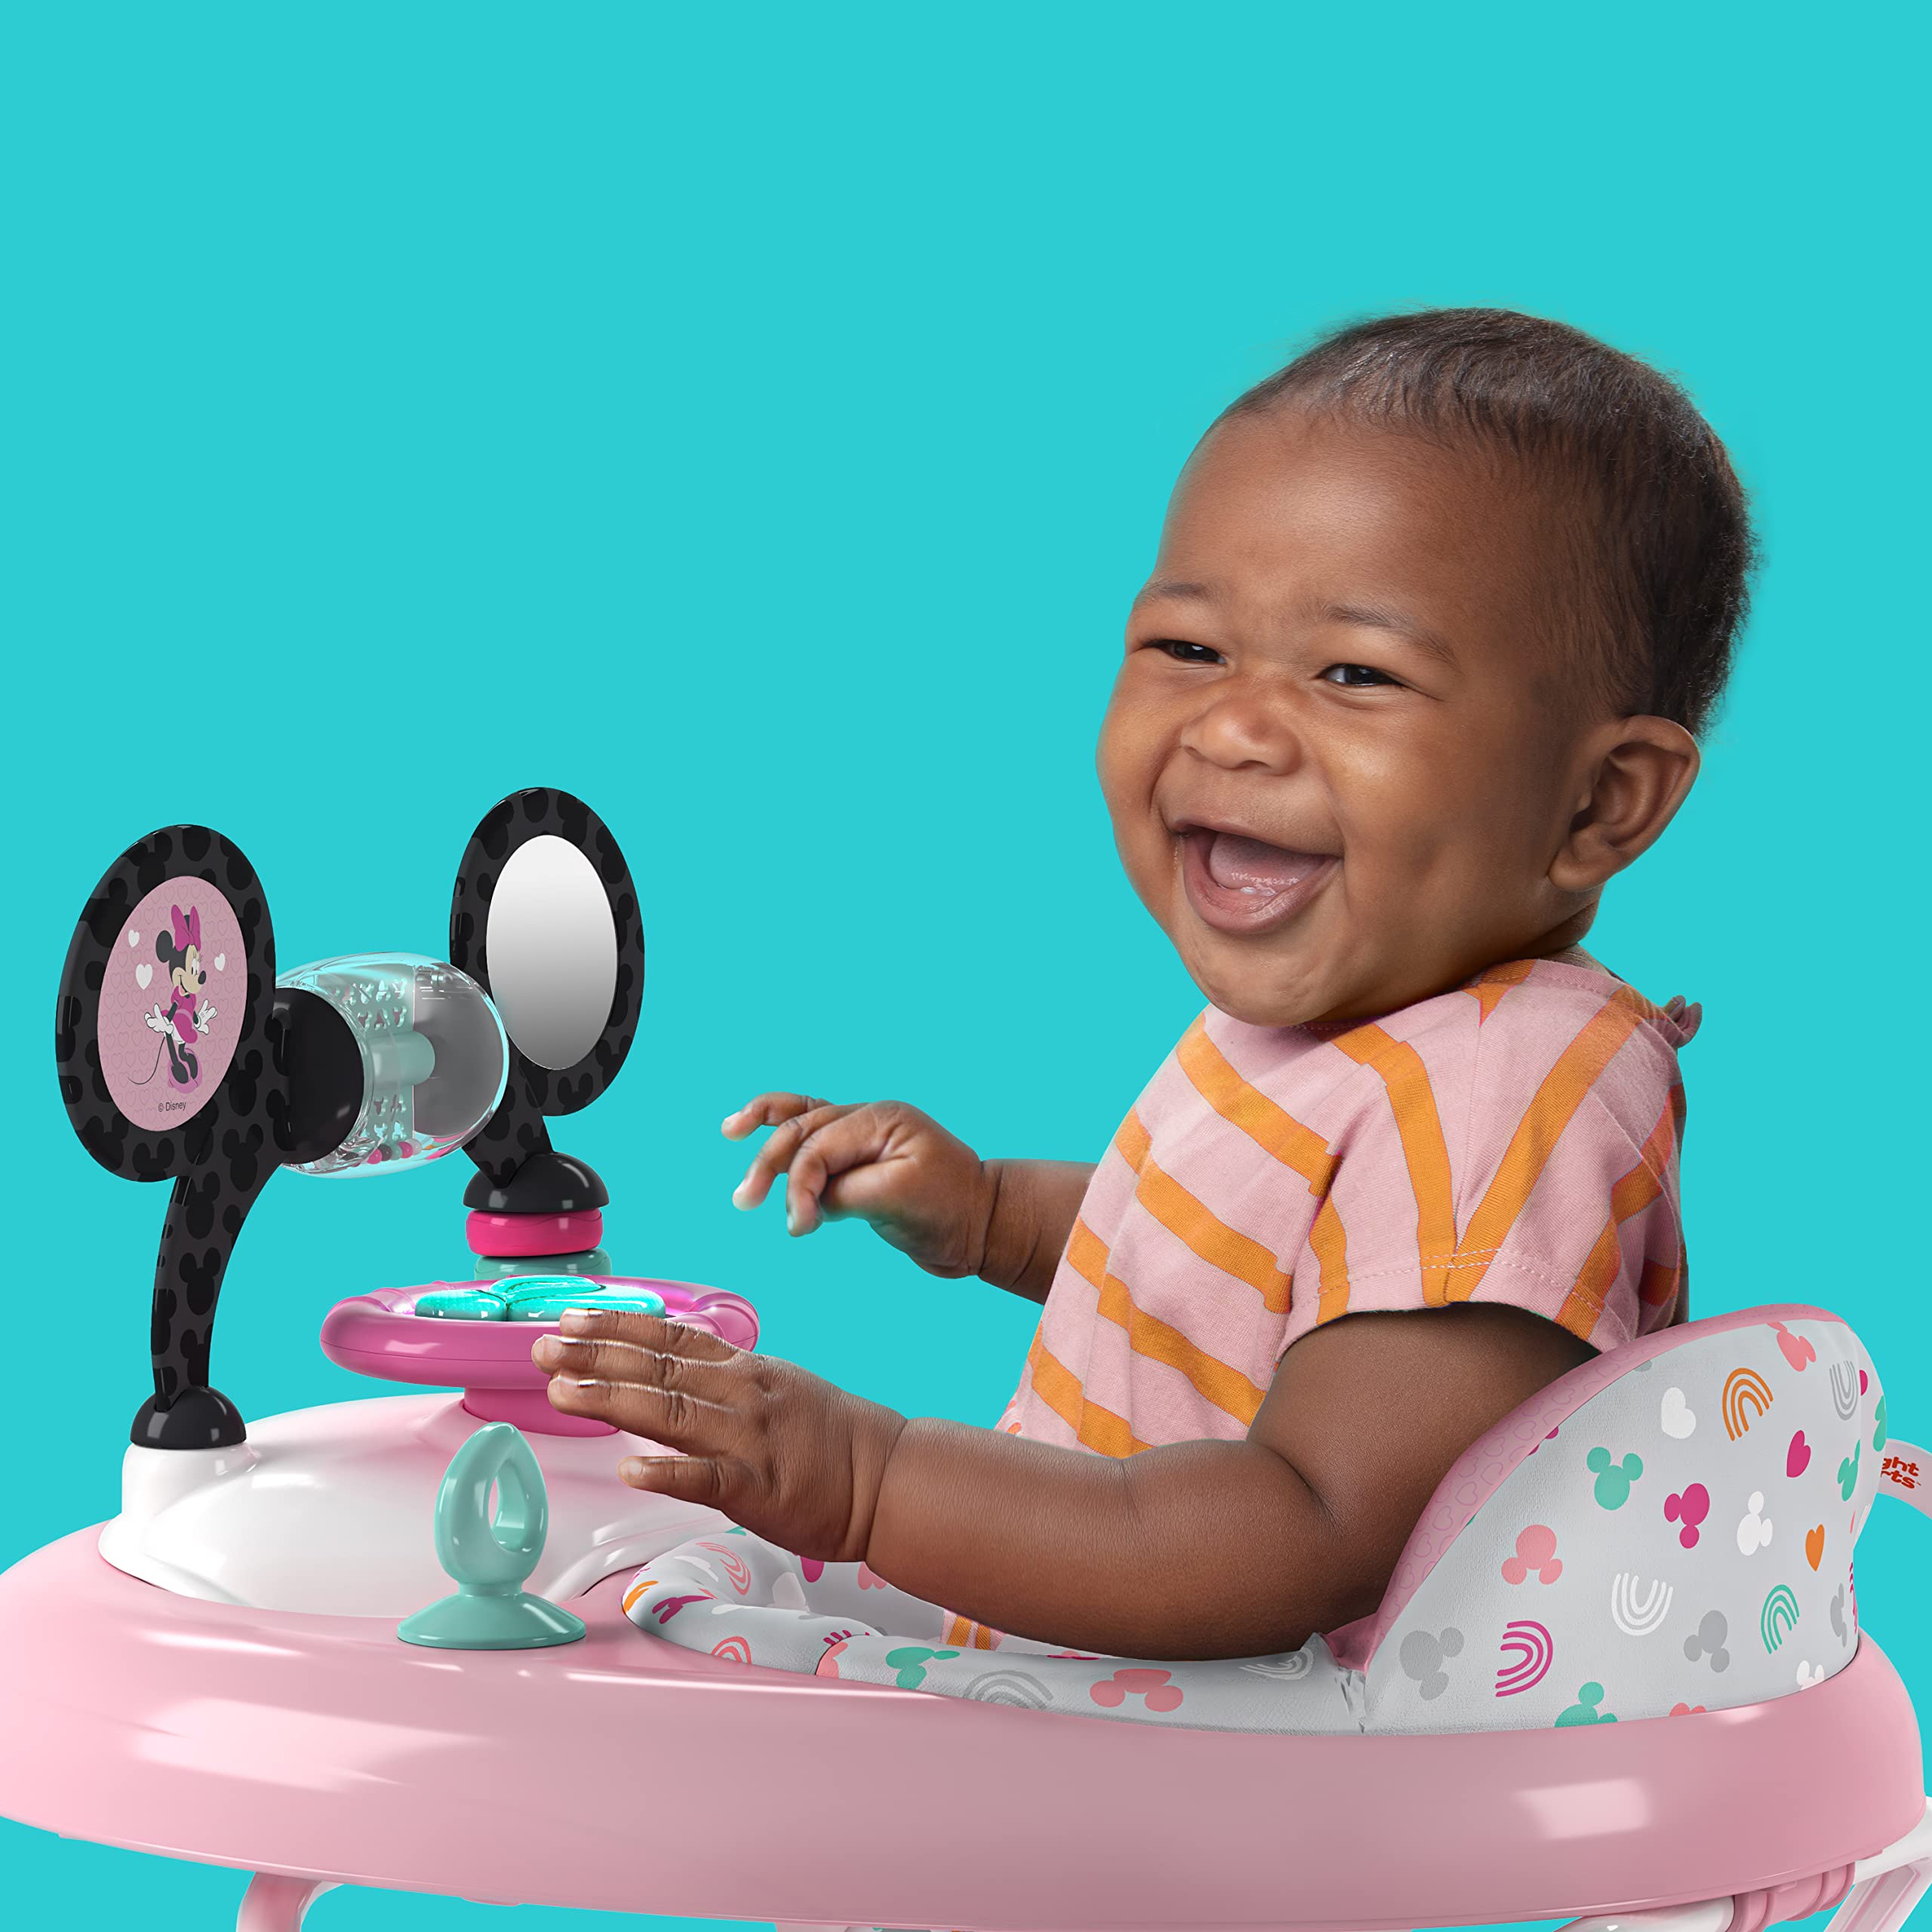 Bright Starts Disney Baby Minnie Mouse Forever Besties 2-in-1 Baby Activity Walker - Easy Fold Frame and Removable toy-station, 6 Months and up